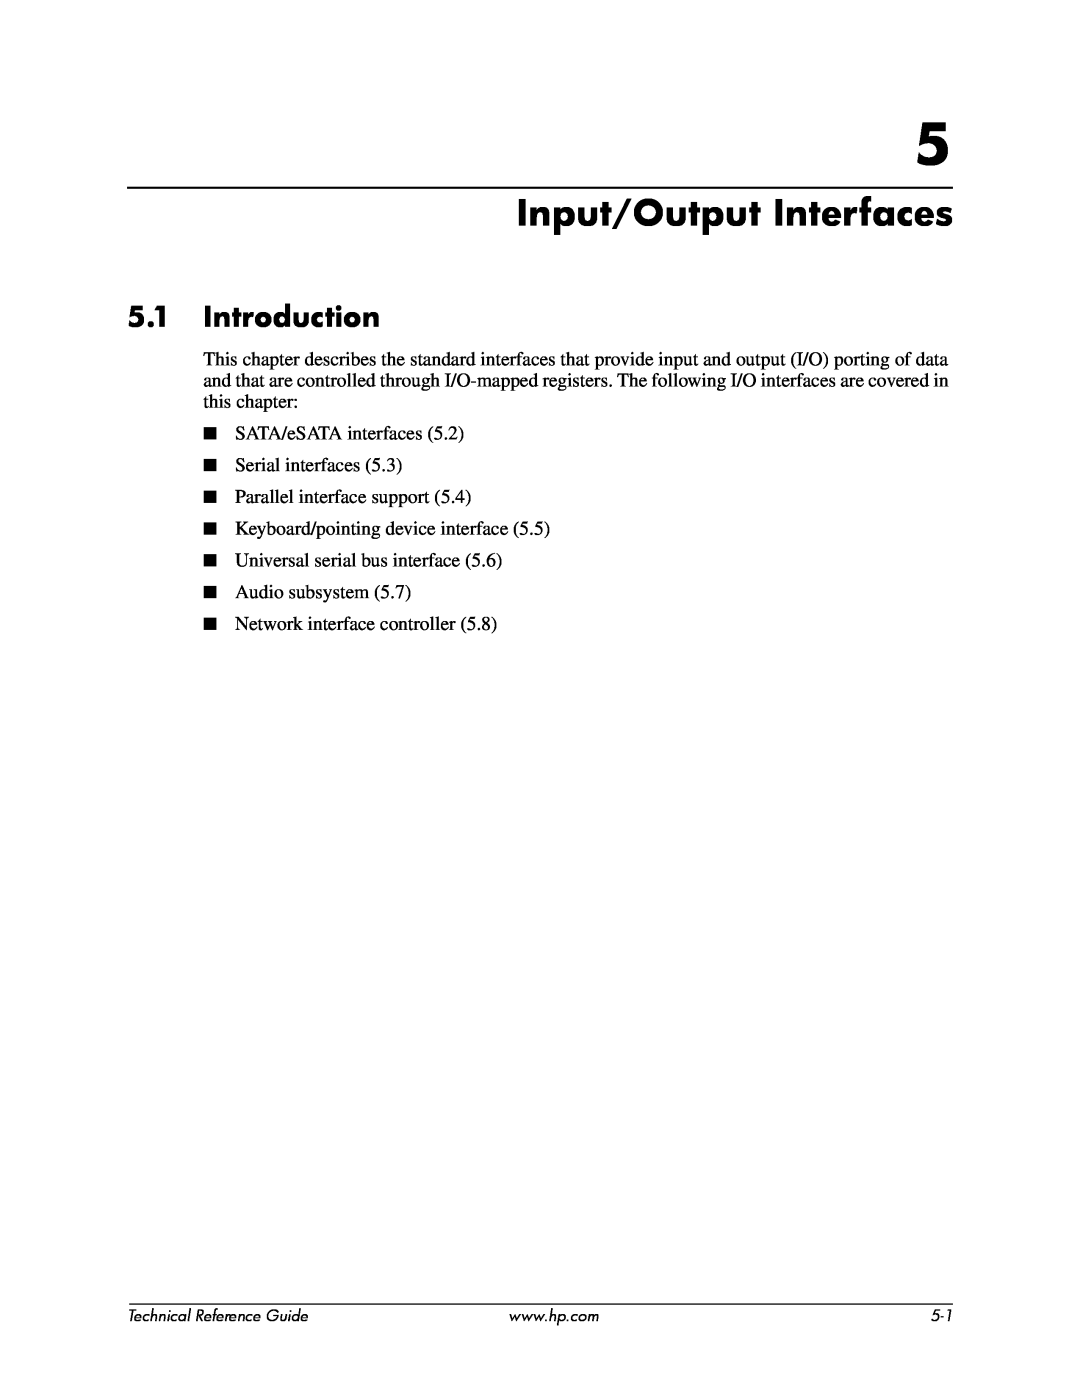 HP 8000 tower manual Input/Output Interfaces, Introduction 